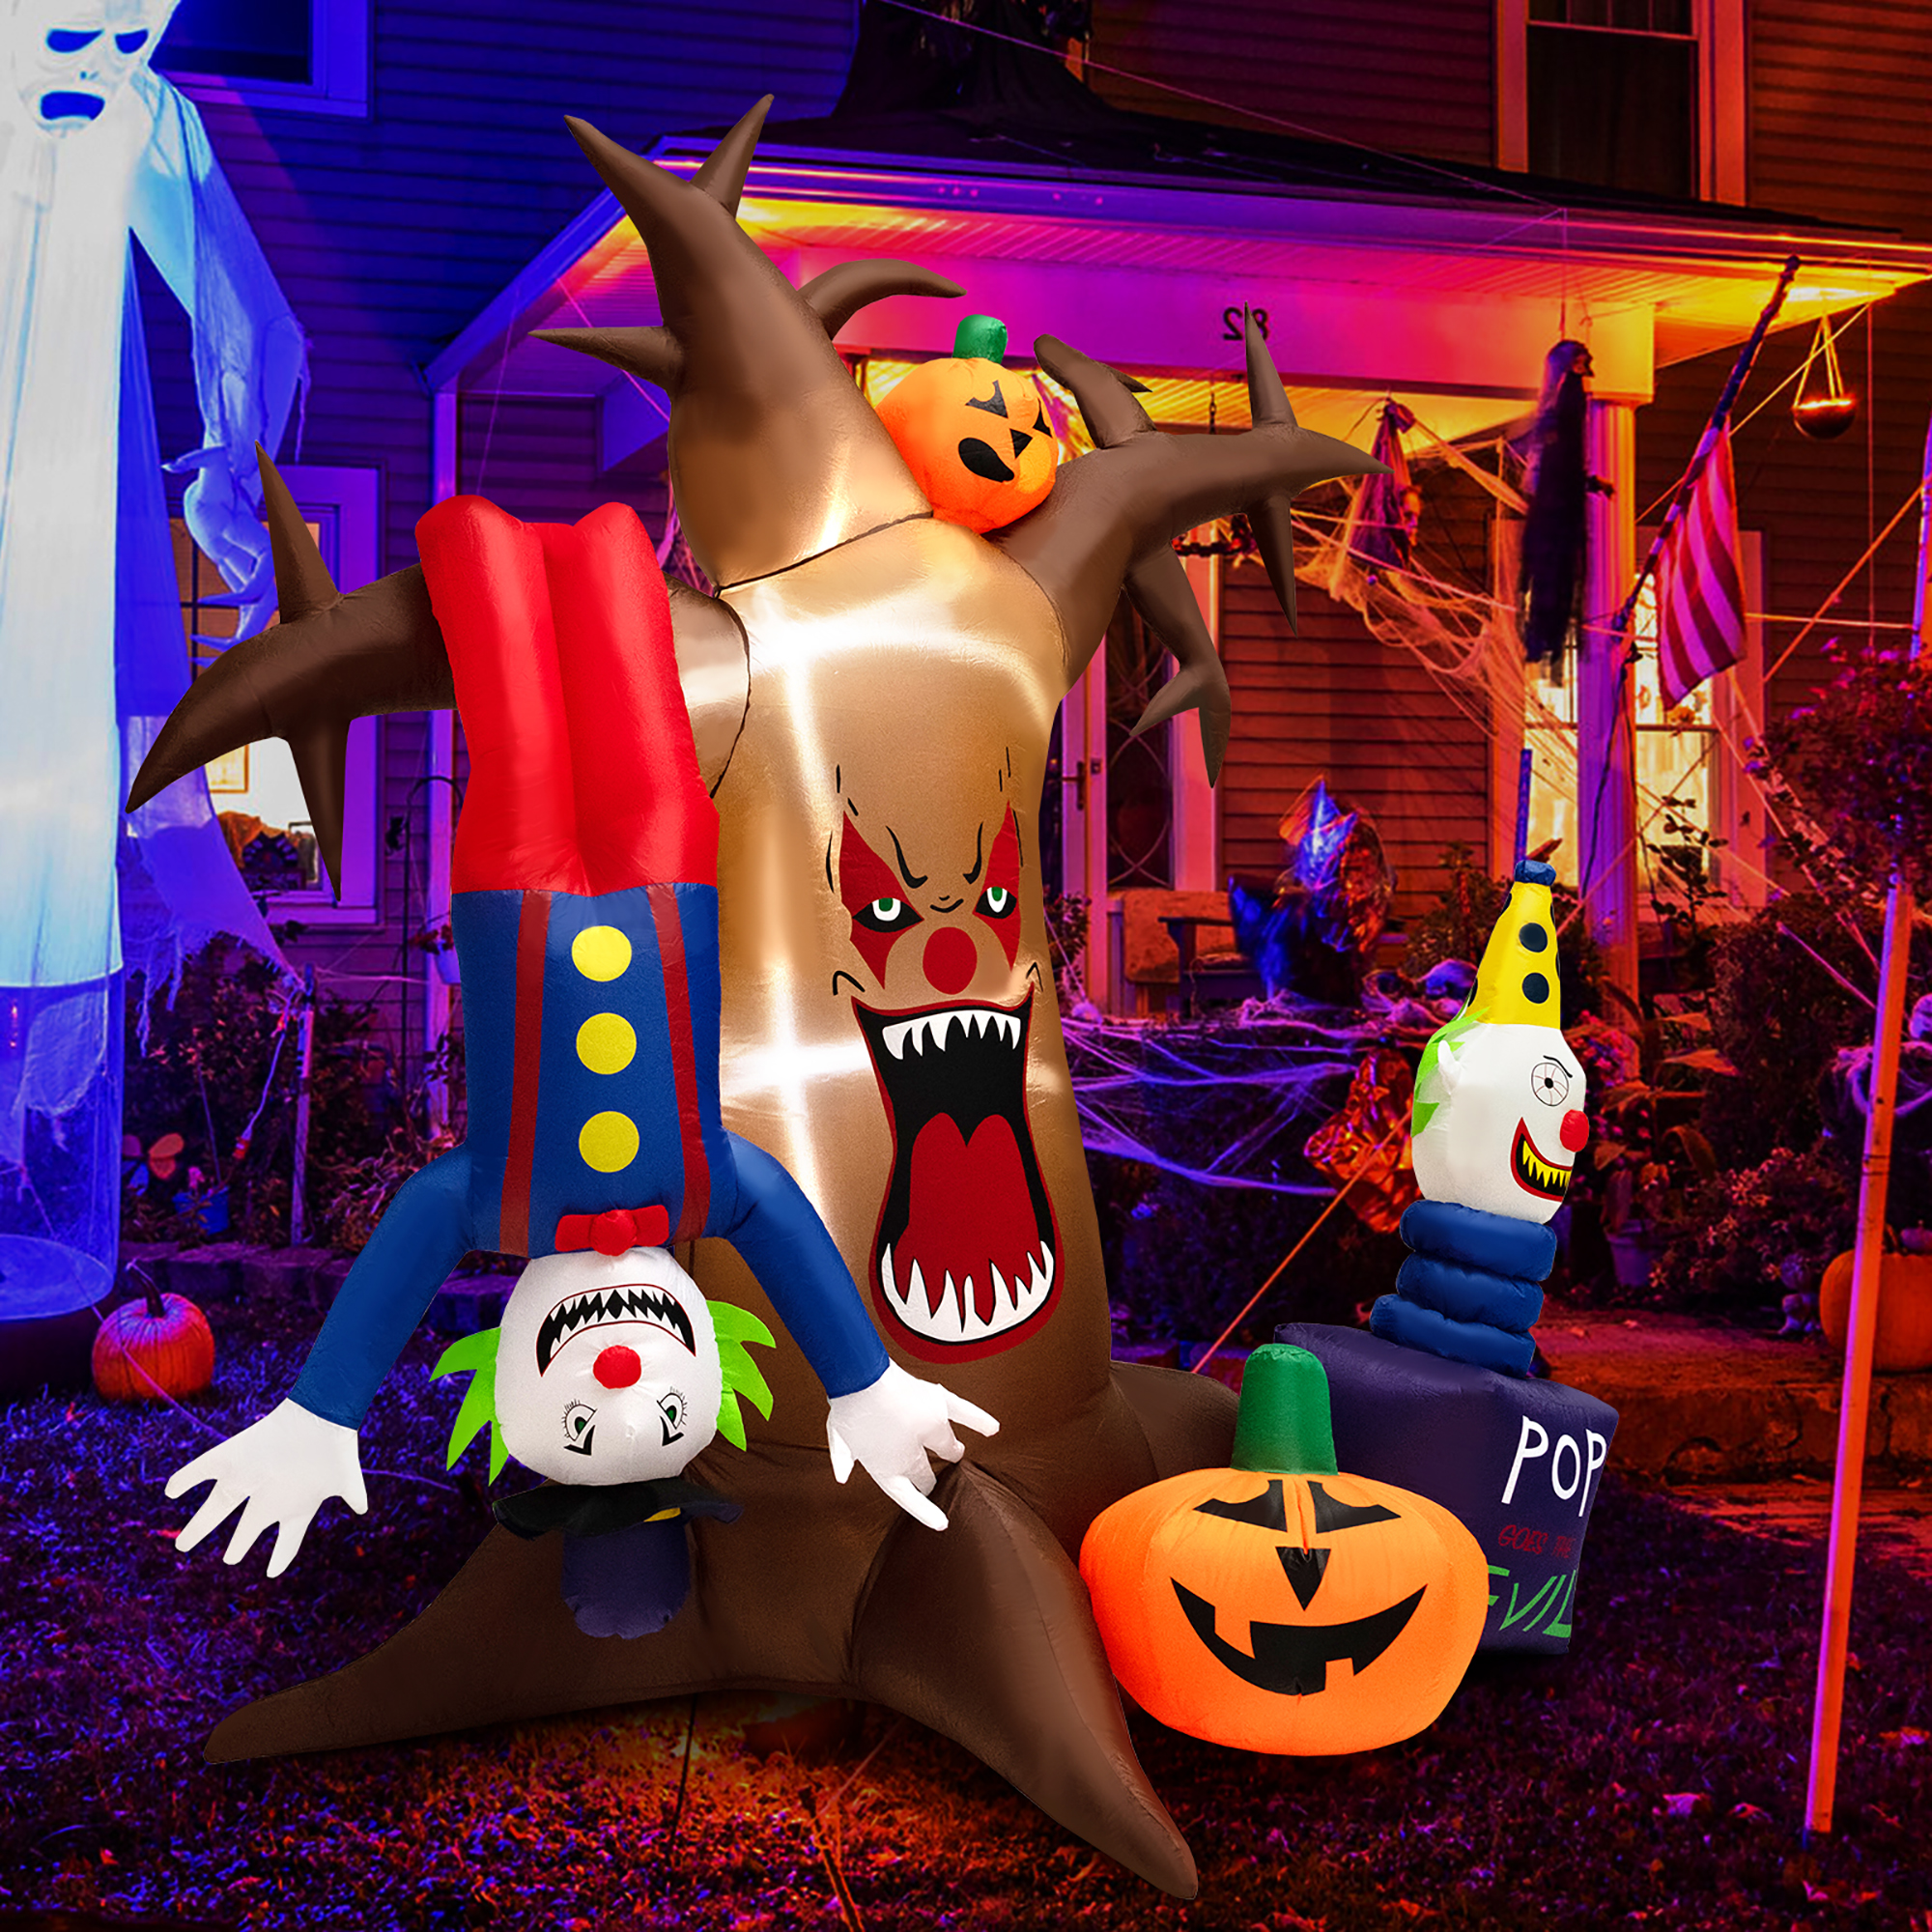 Costway 8 FT Halloween Inflatable Tree Giant Blow-up Spooky Dead Tree with Pop-up Clowns